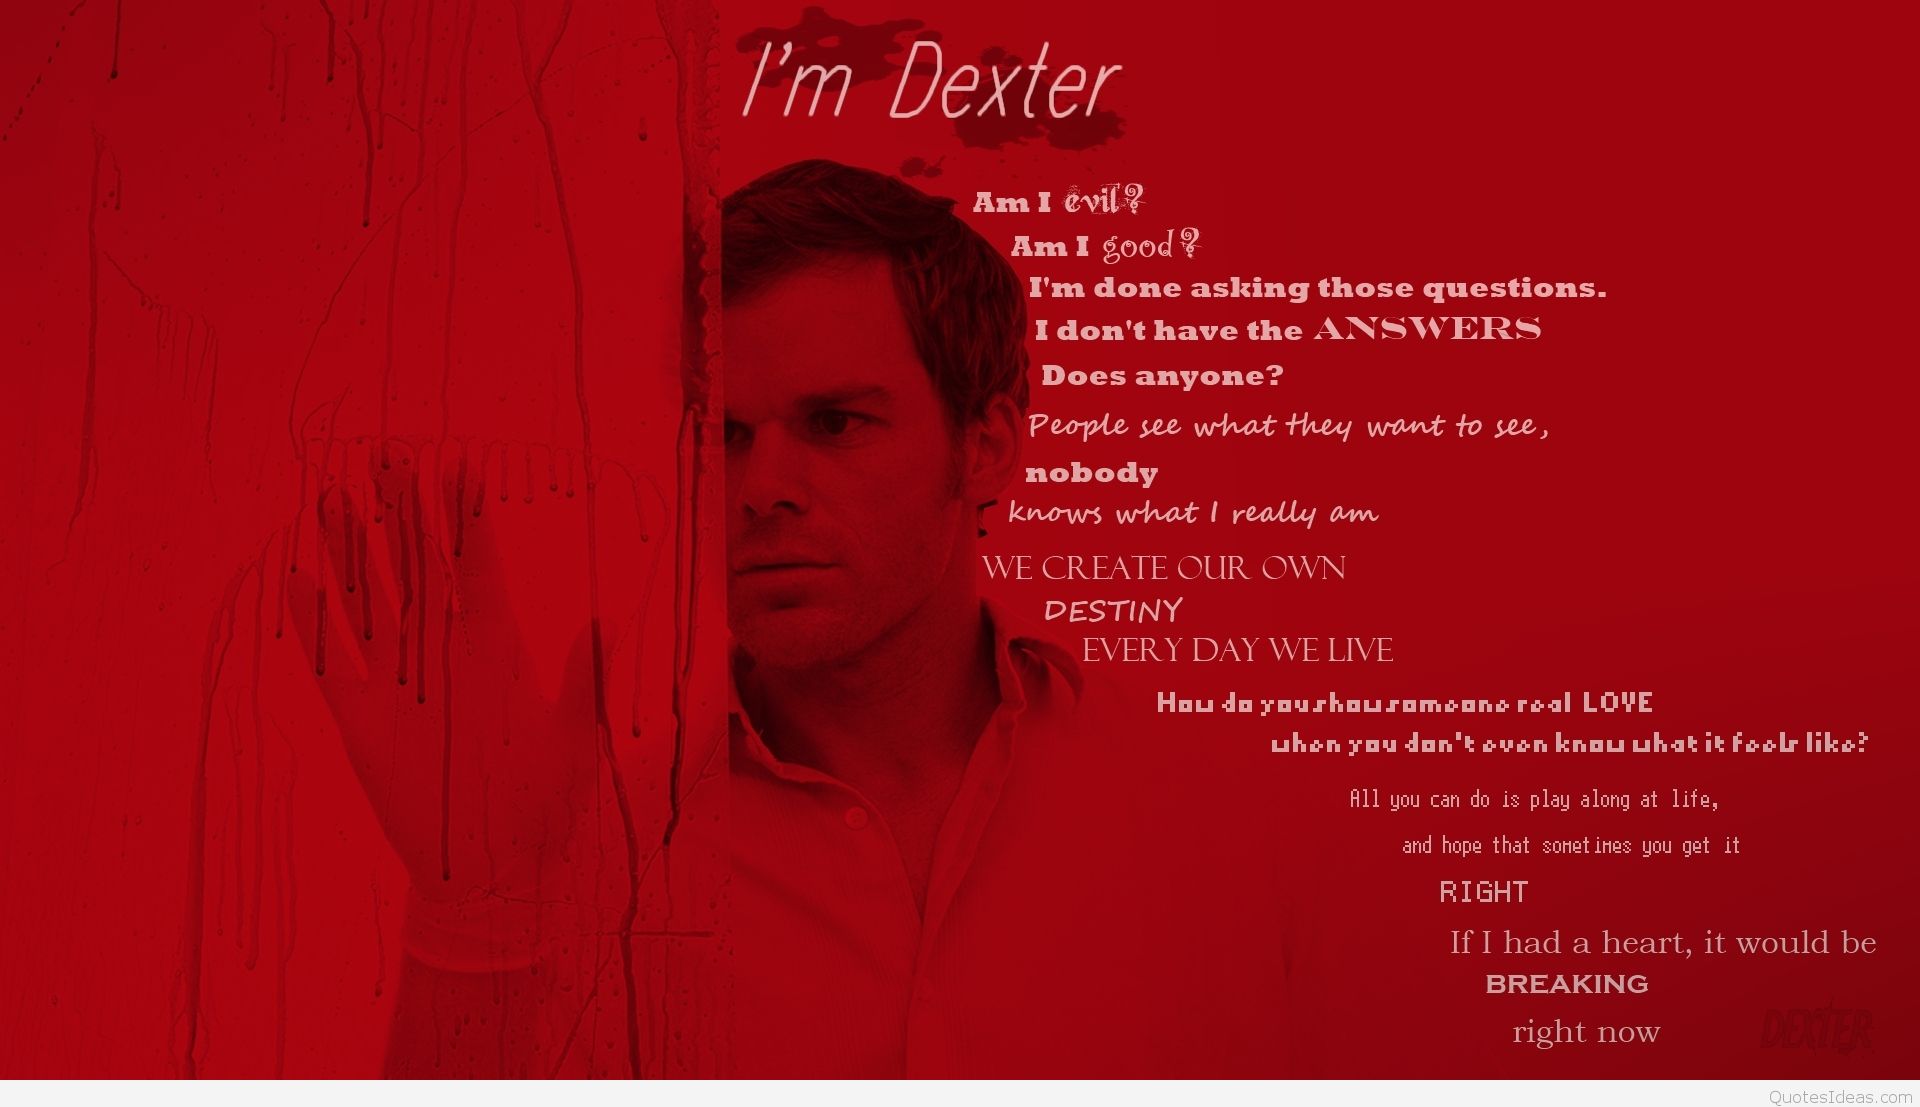 Inspirational Dexter Series Quotes Image And Wallpaper